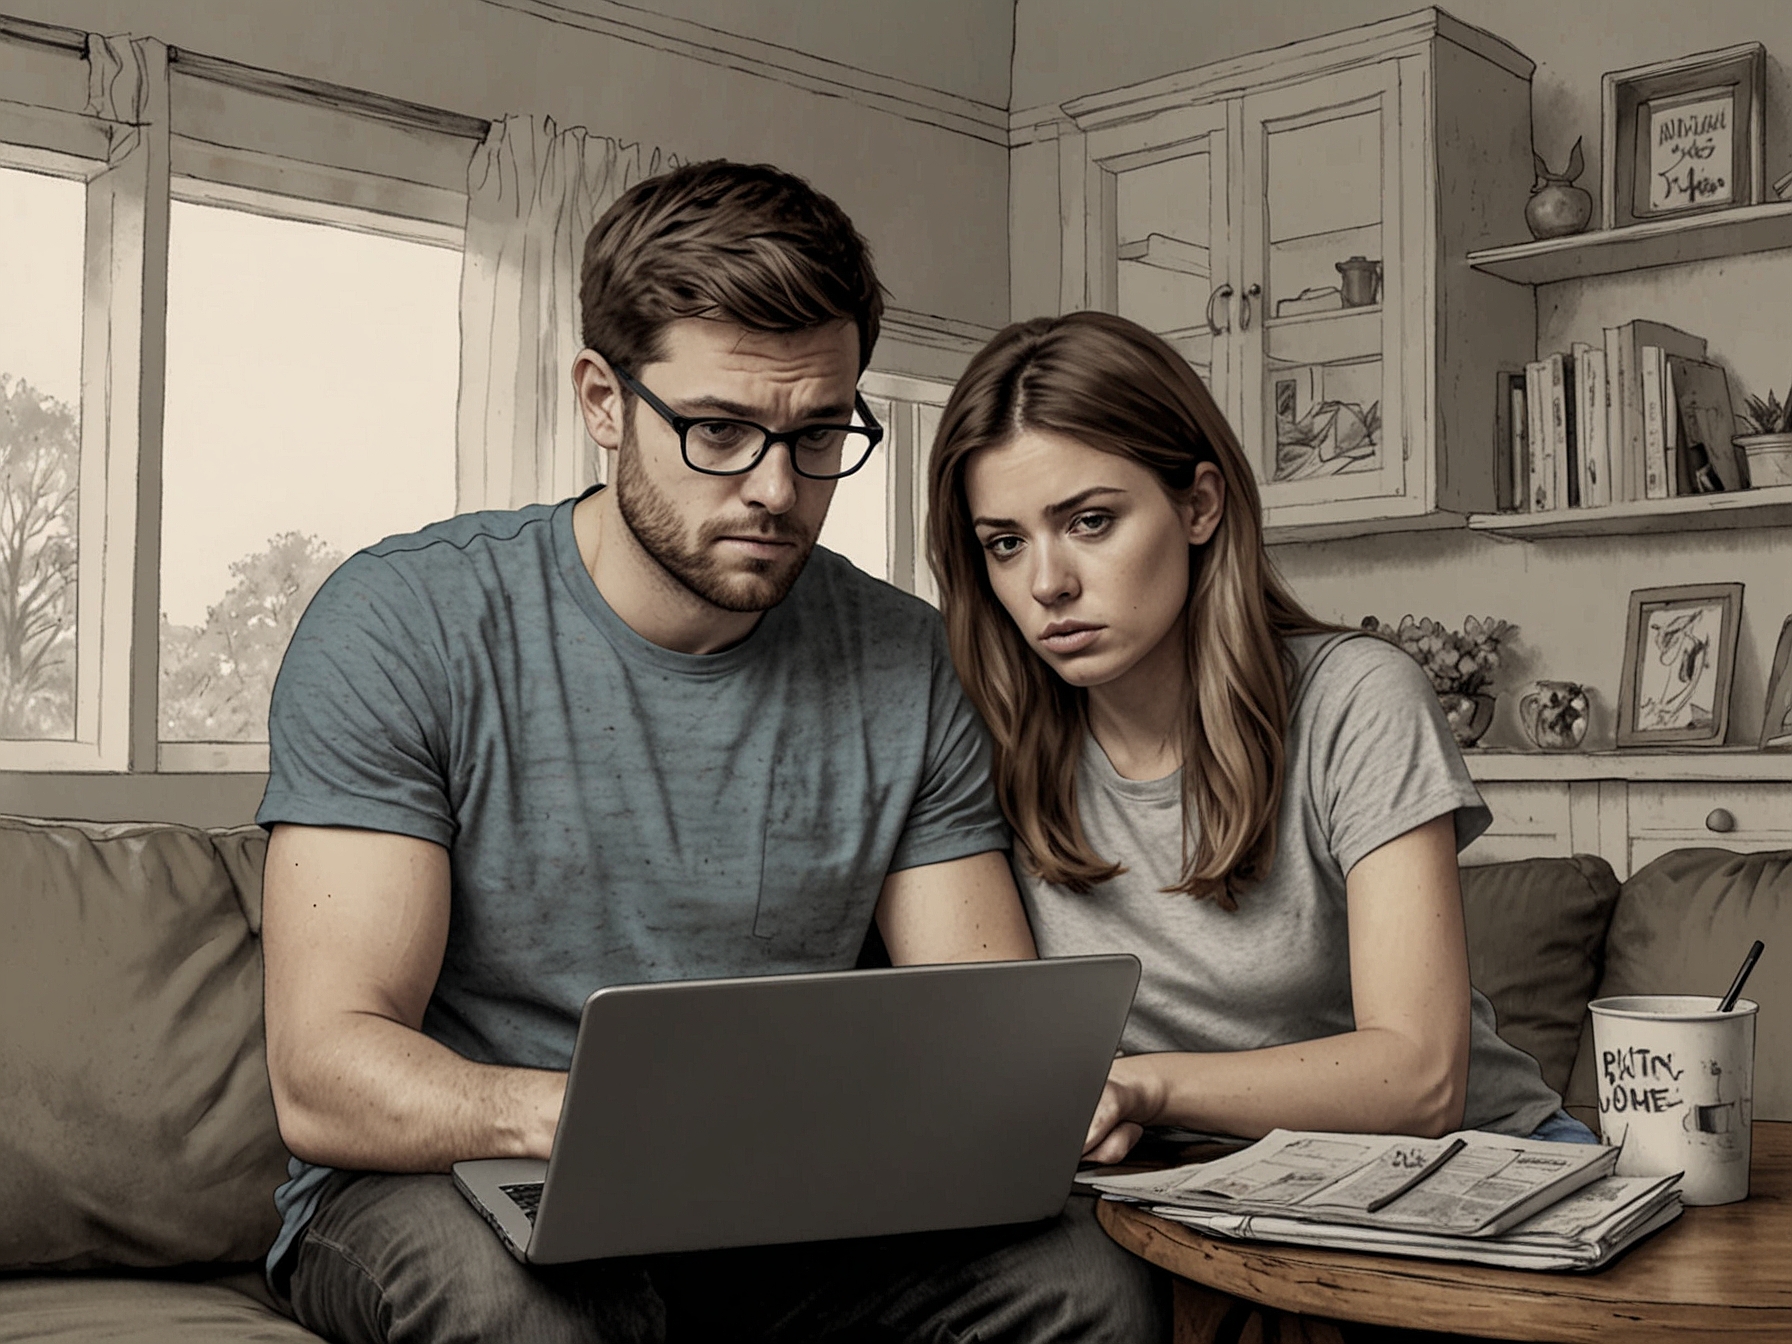 A young couple looks frustrated as they browse property listings on a laptop, highlighting the challenges millennials face in buying homes due to high mortgage rates and property prices.